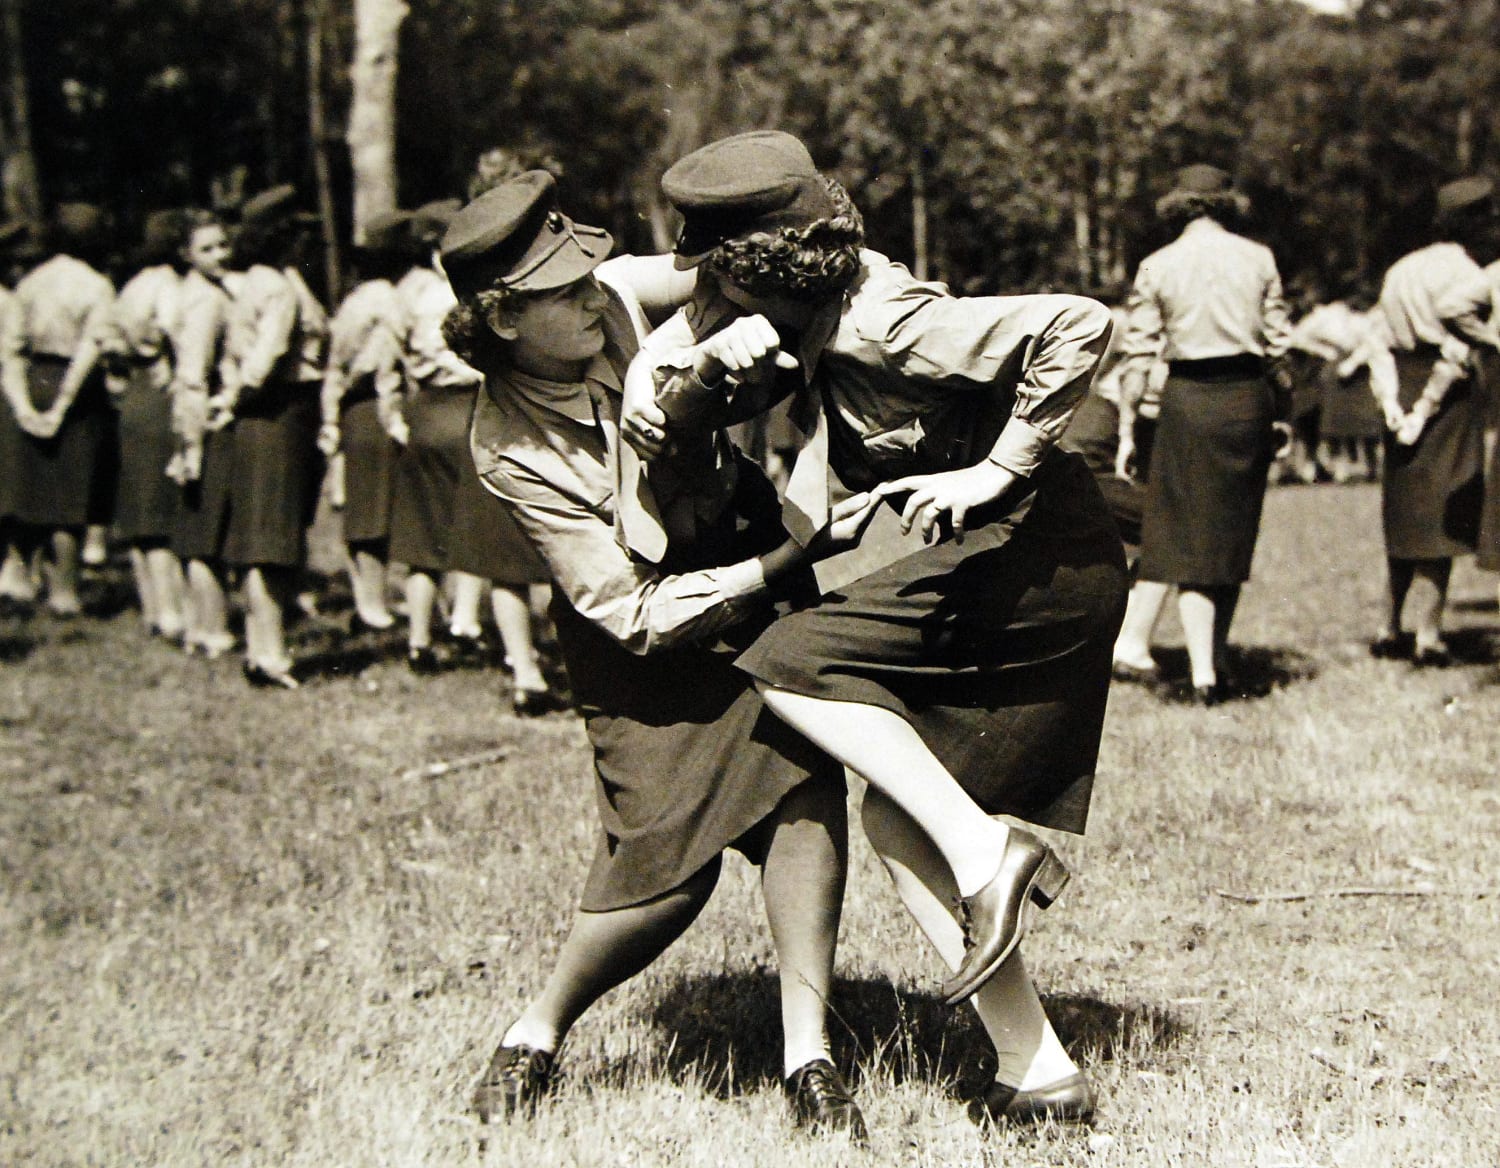 June 18, 1943: How to disable an armed opponent is demonstrated by two girl Marines in training at Camp Lejeune, New River, North Carolina. The Marines with their backs to the camera are watching another display of feminine skill in the art of self-defense.